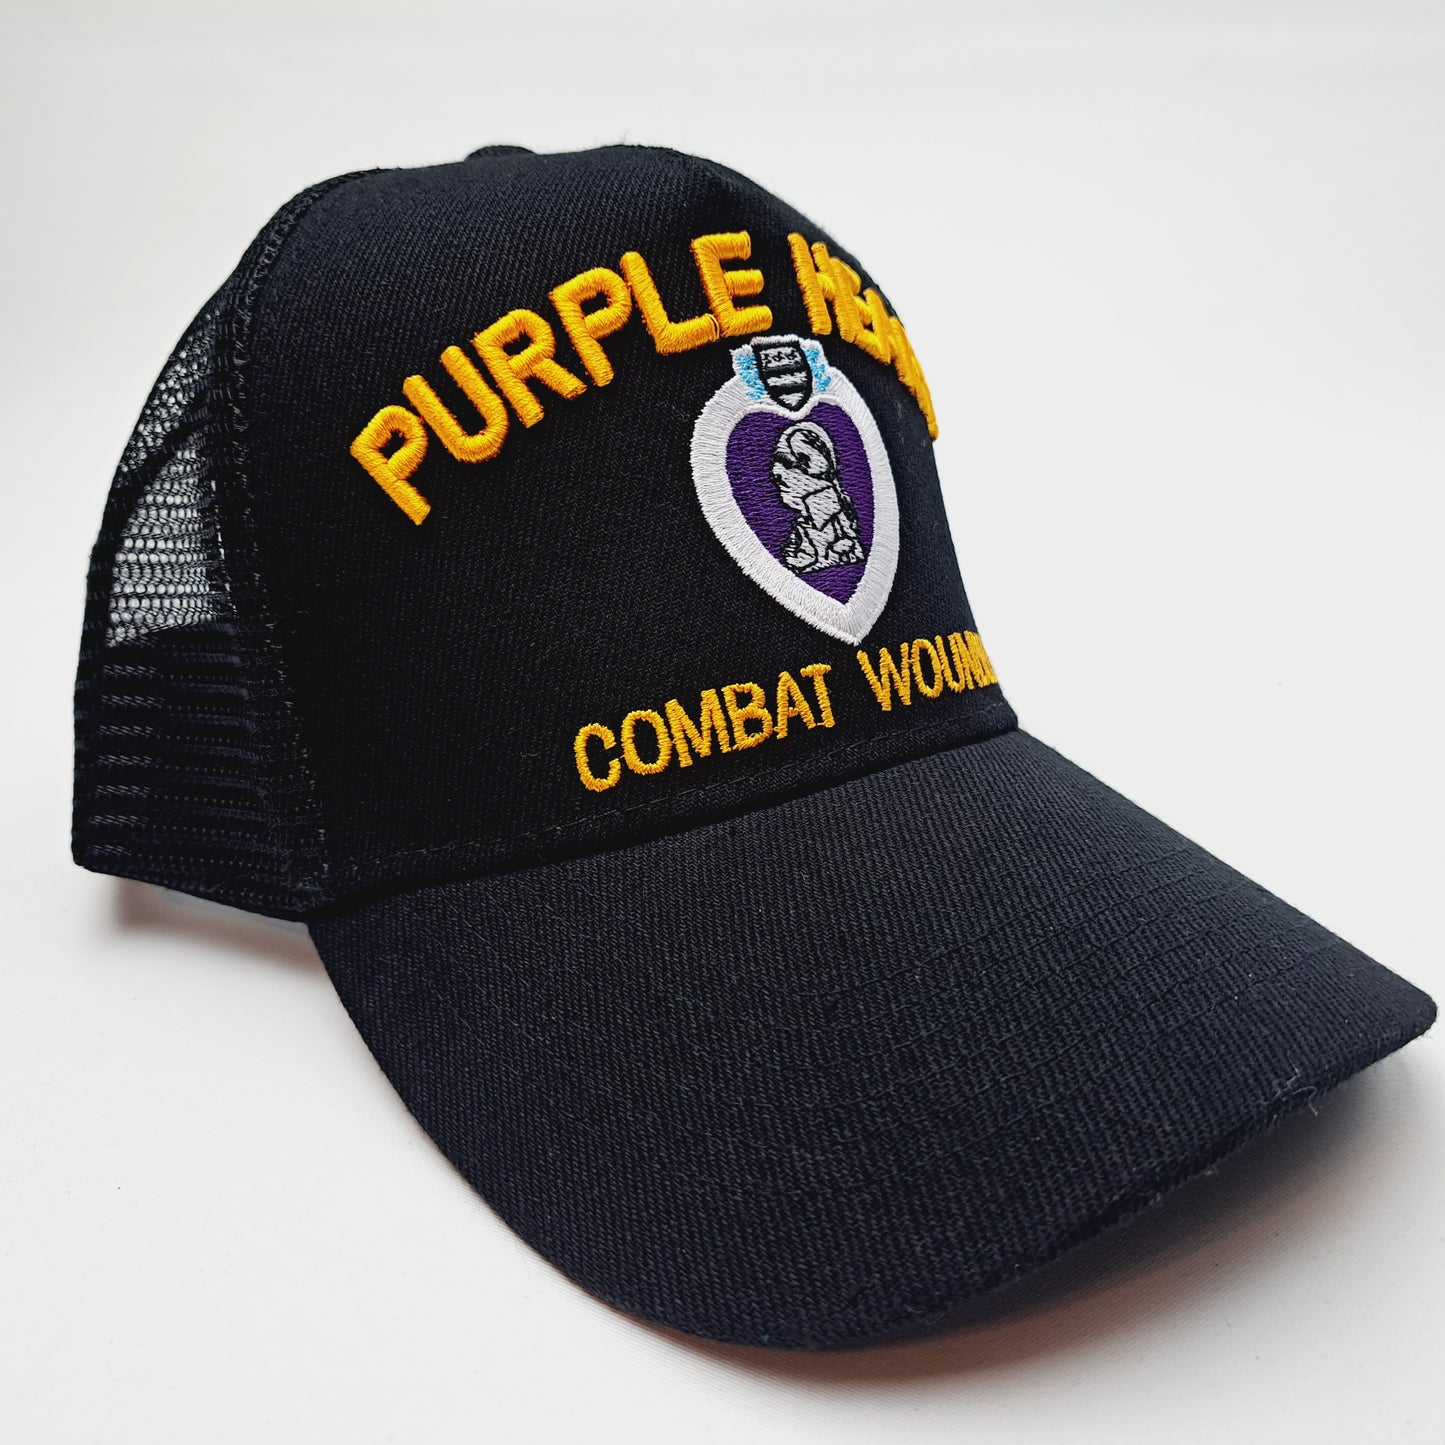 Purple Heart Combat Wounded Men's Cap Ball Hat Black Embroidered Acrylic